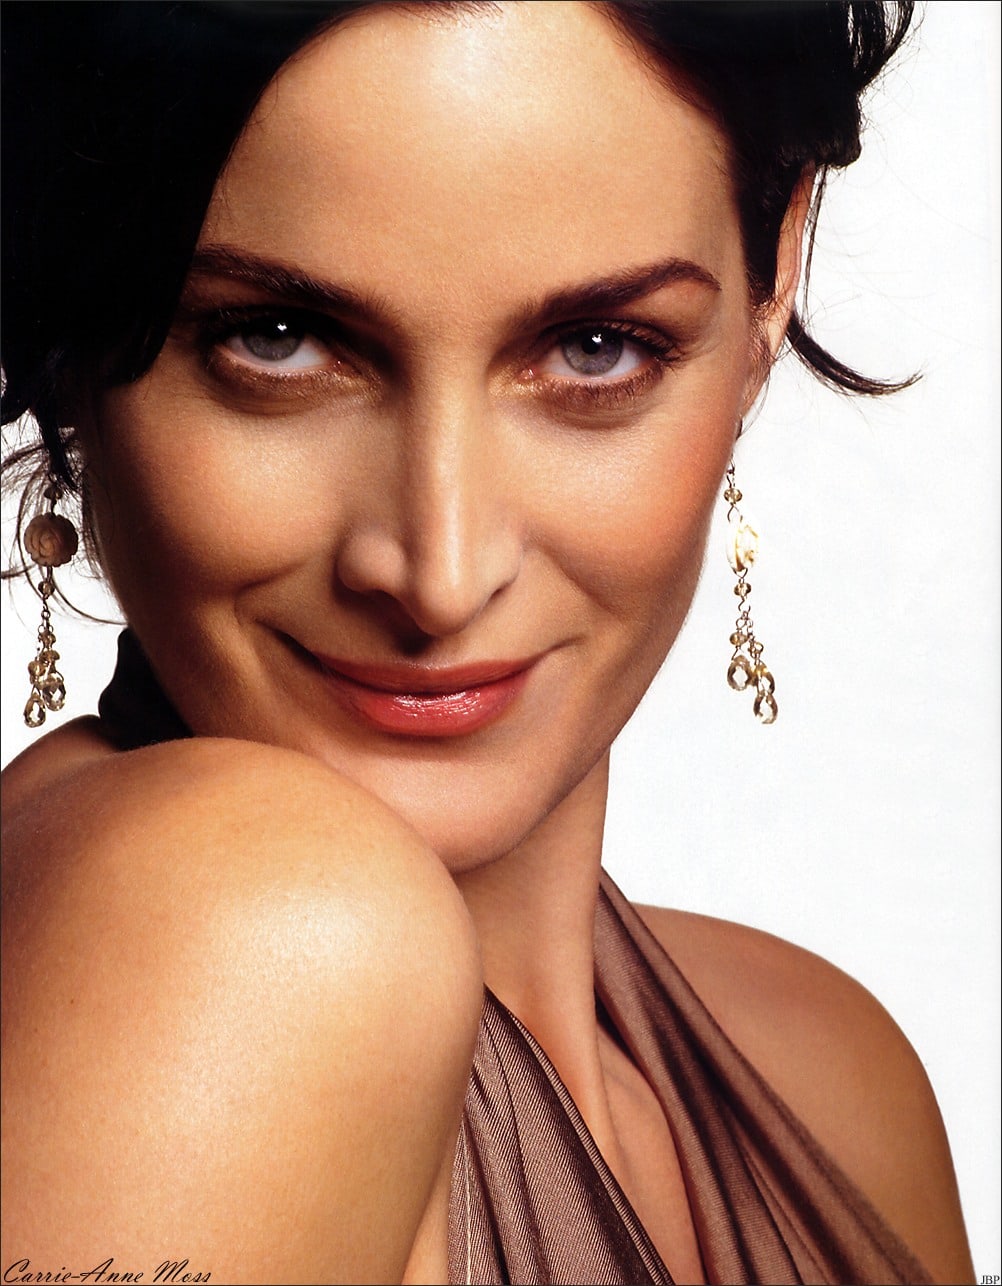 Carrie Anne Moss Image